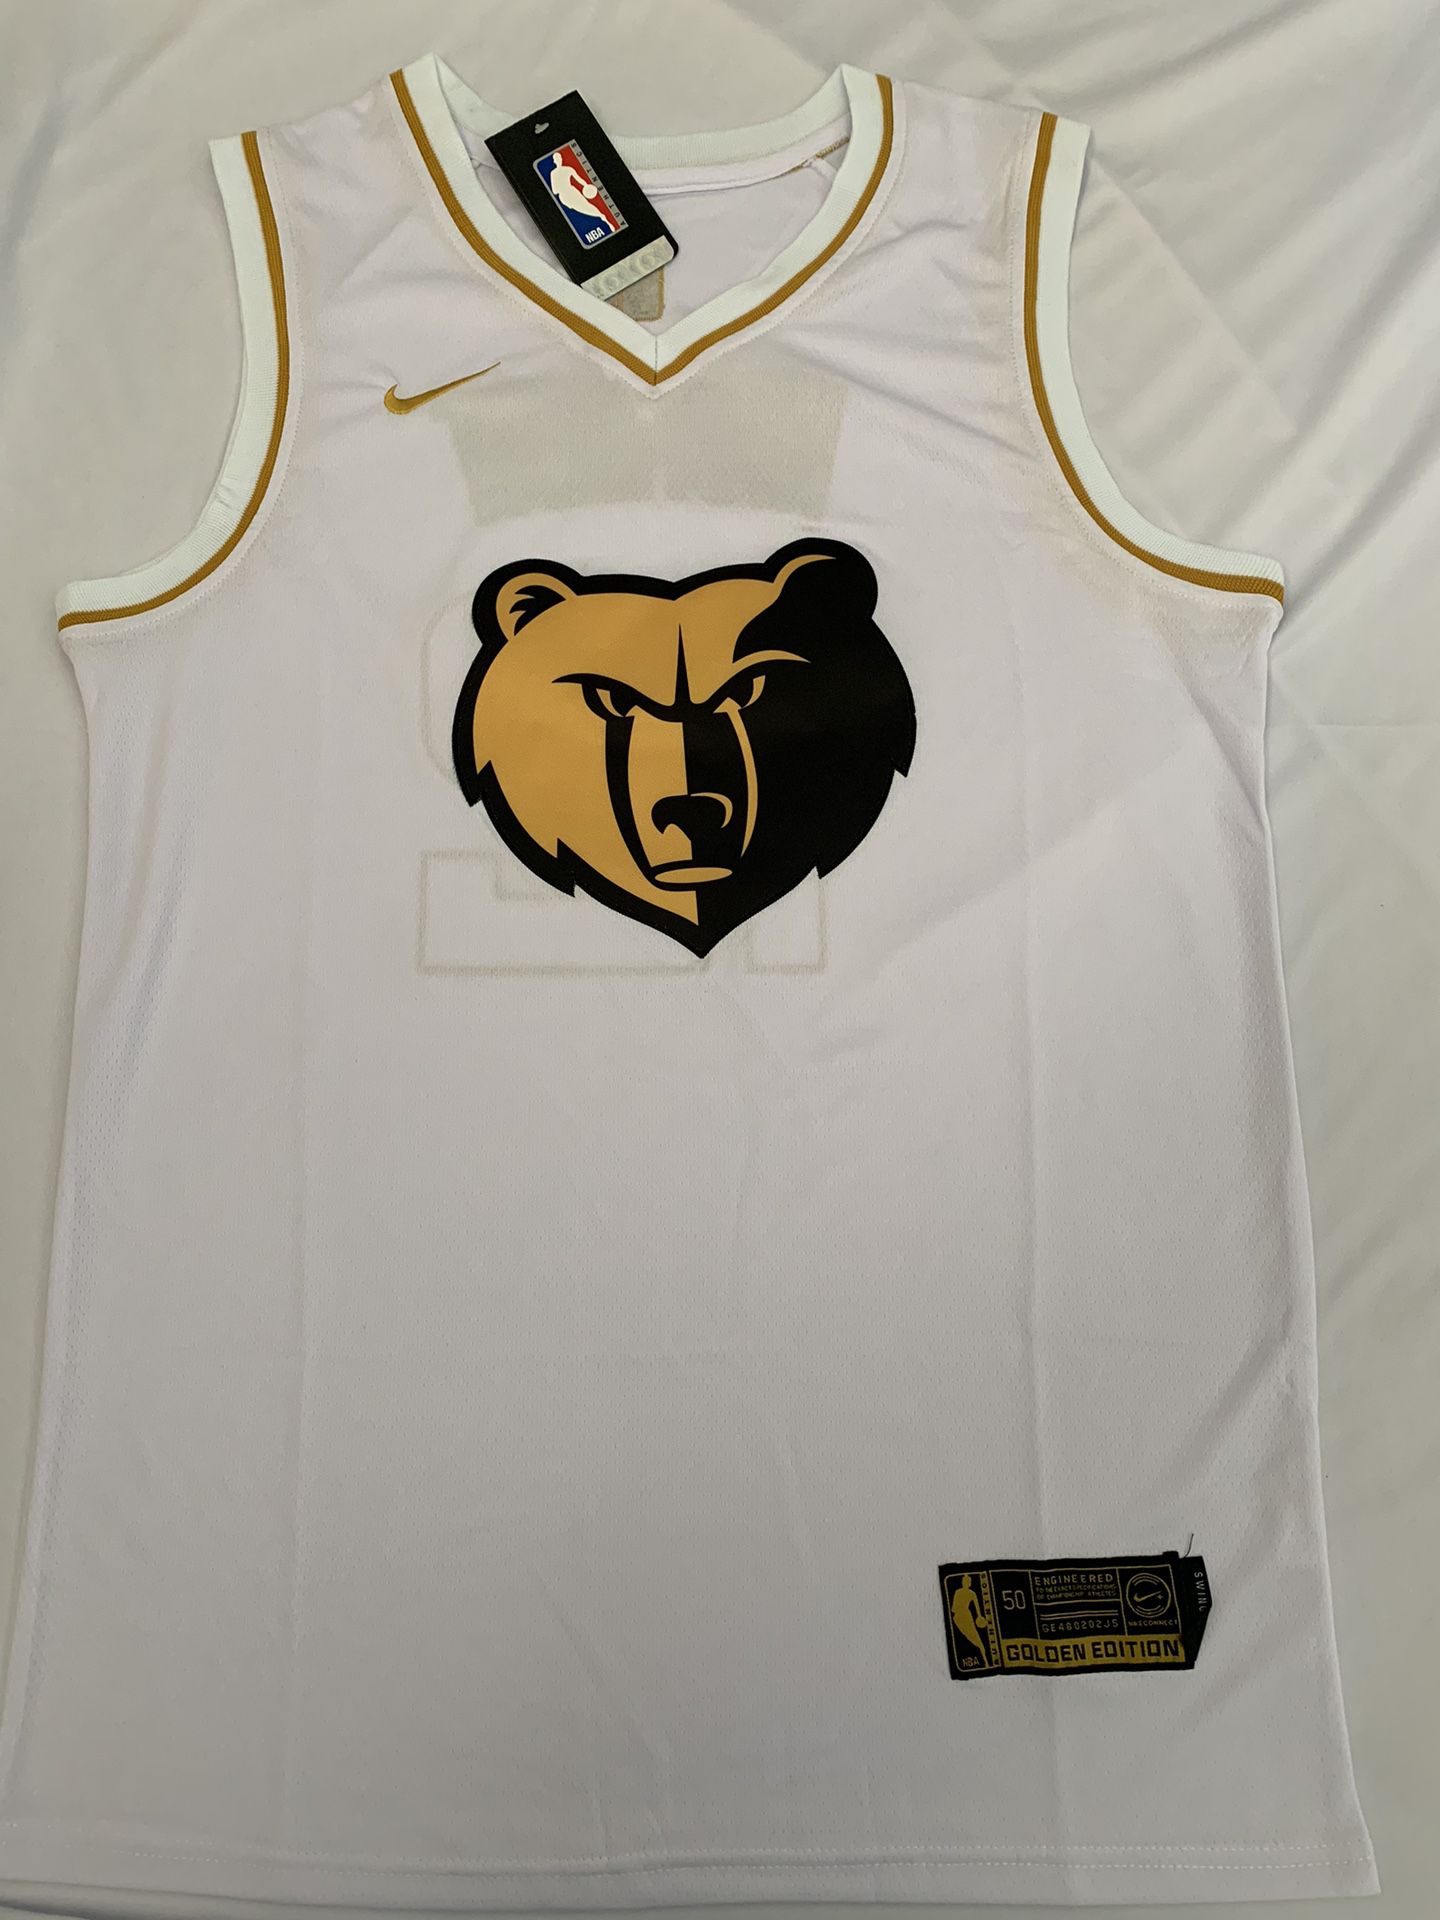 Grizzlies #12 Morant NBA Jersey for Sale in Grantville, PA - OfferUp